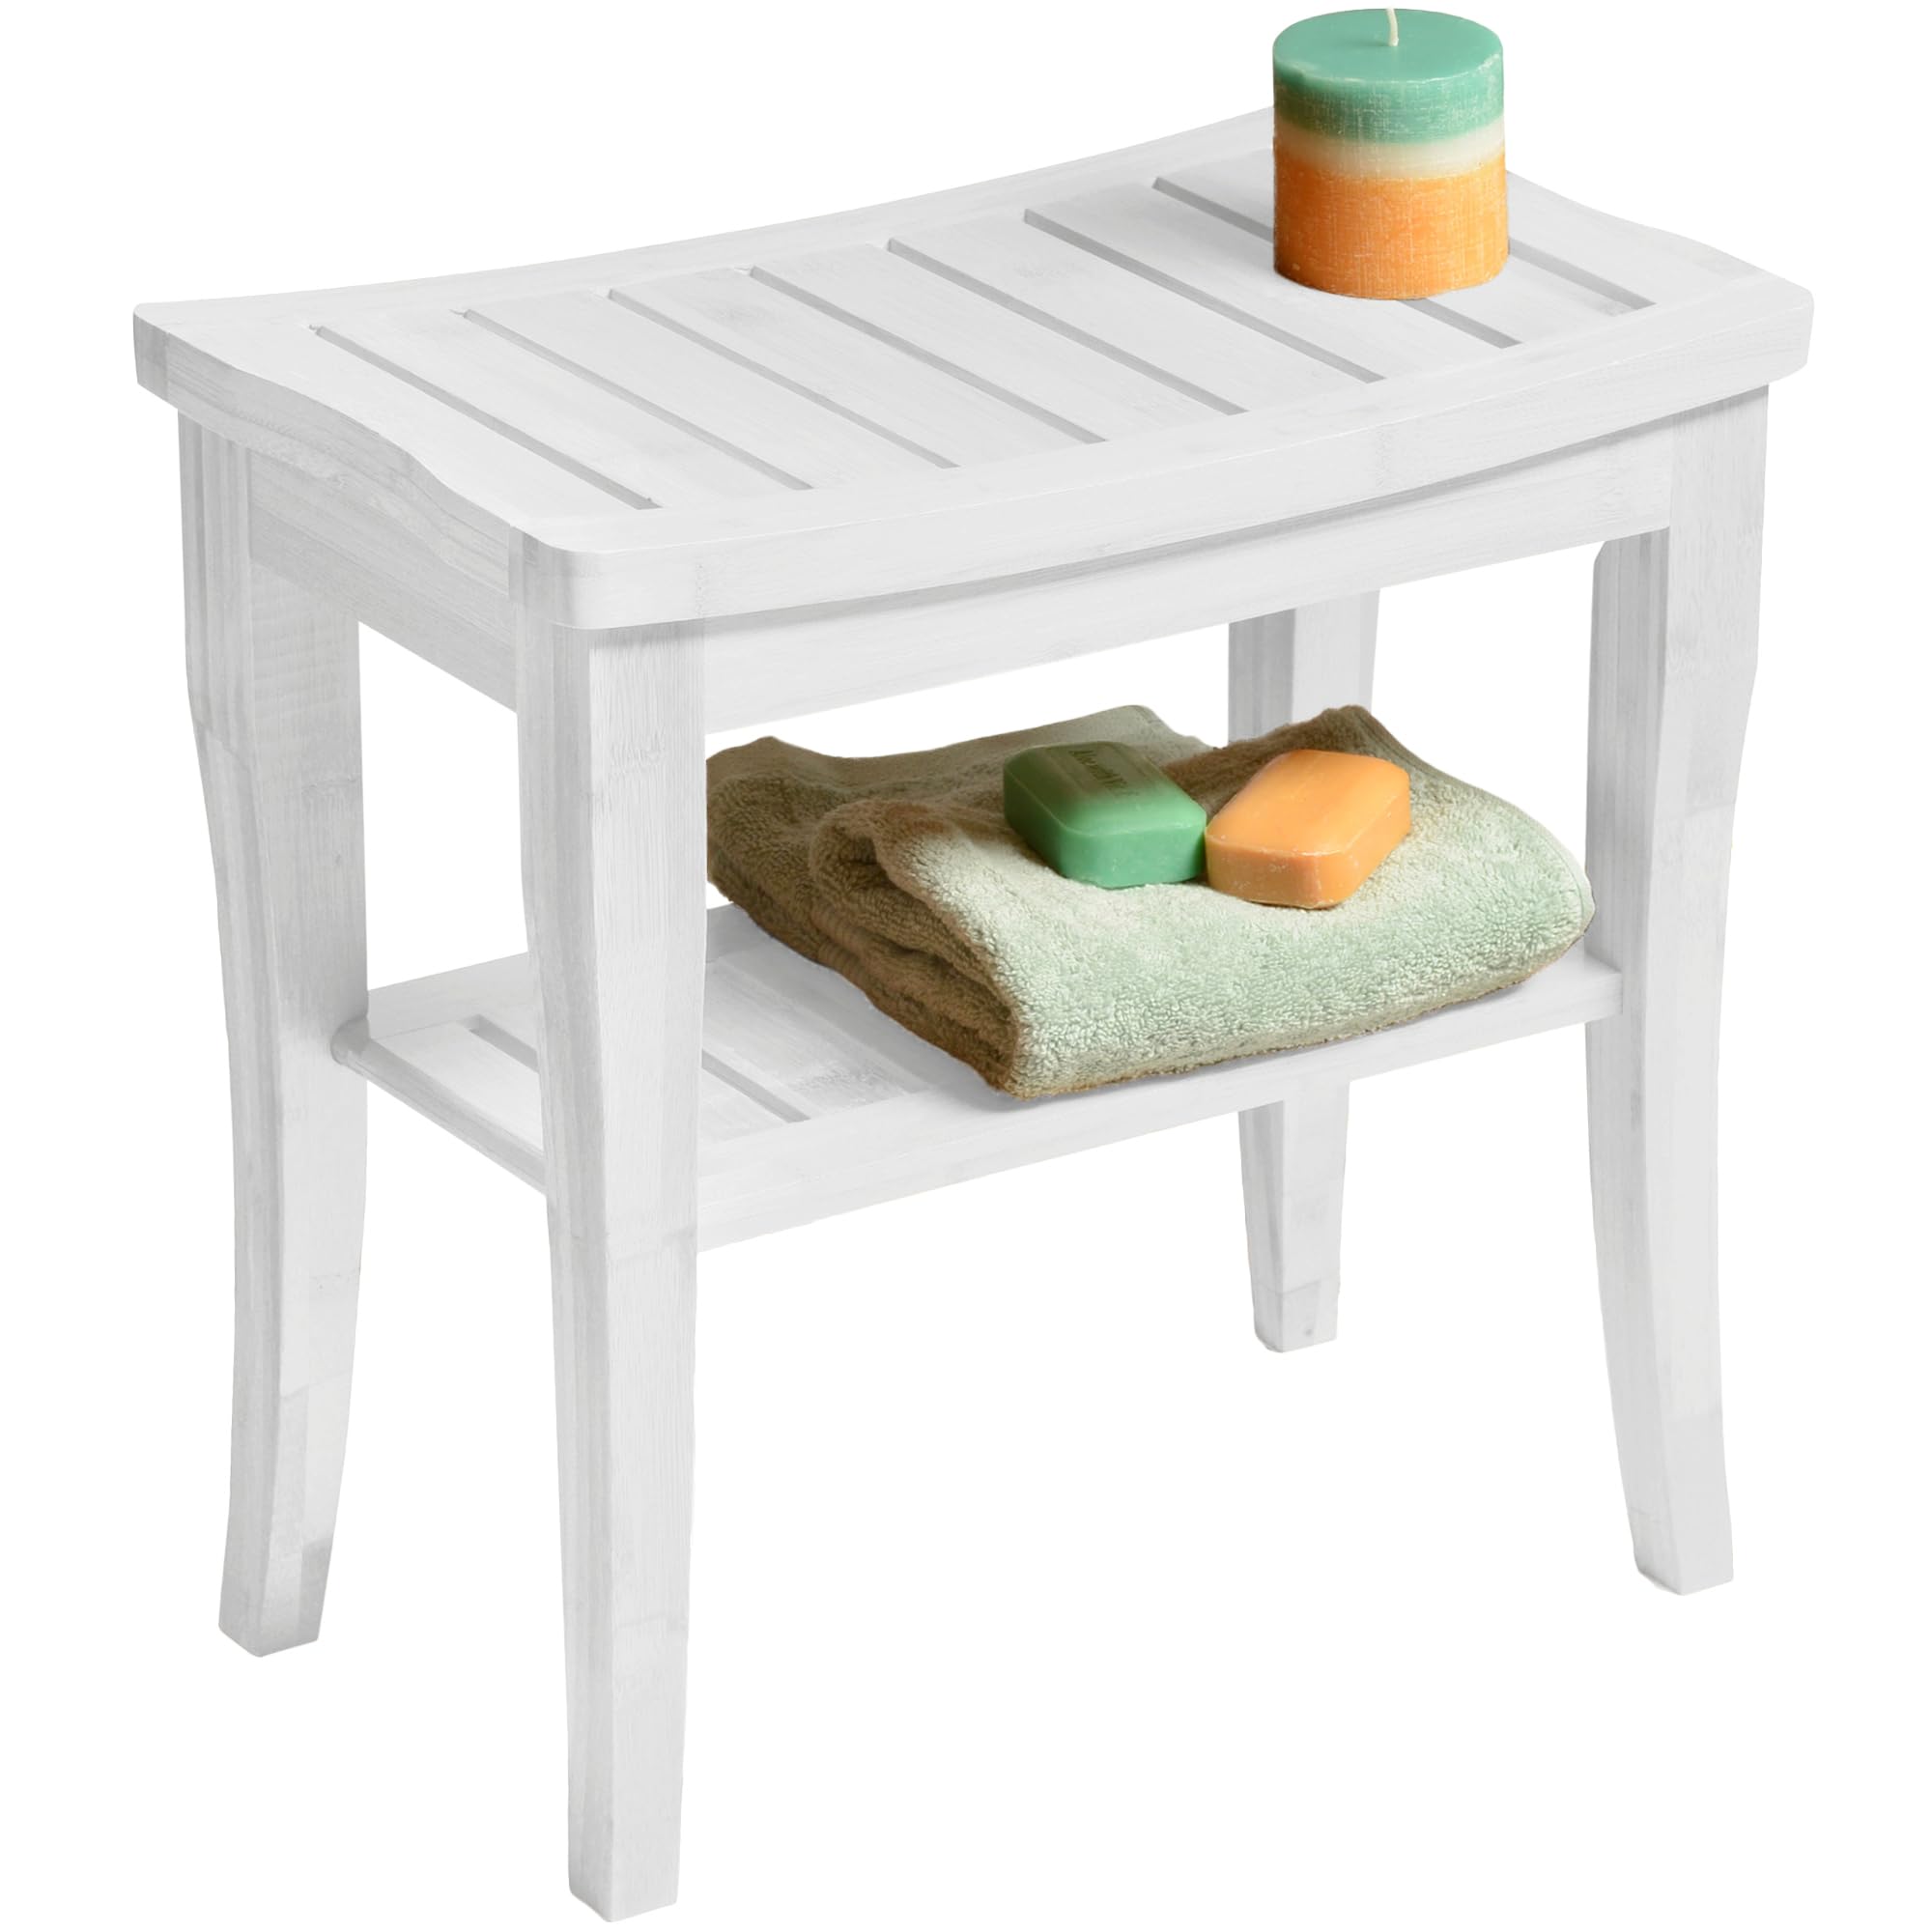 Bamboo Shower Bench Spa Stool - Wood 2-Tier Seat, Foot Rest Shaving Stool with Non-Slip Feet + Storage Shelf - Seat or Organizer for Bathroom, Living Room, Bedroom and Garden D�cor (White)  - Acceptable